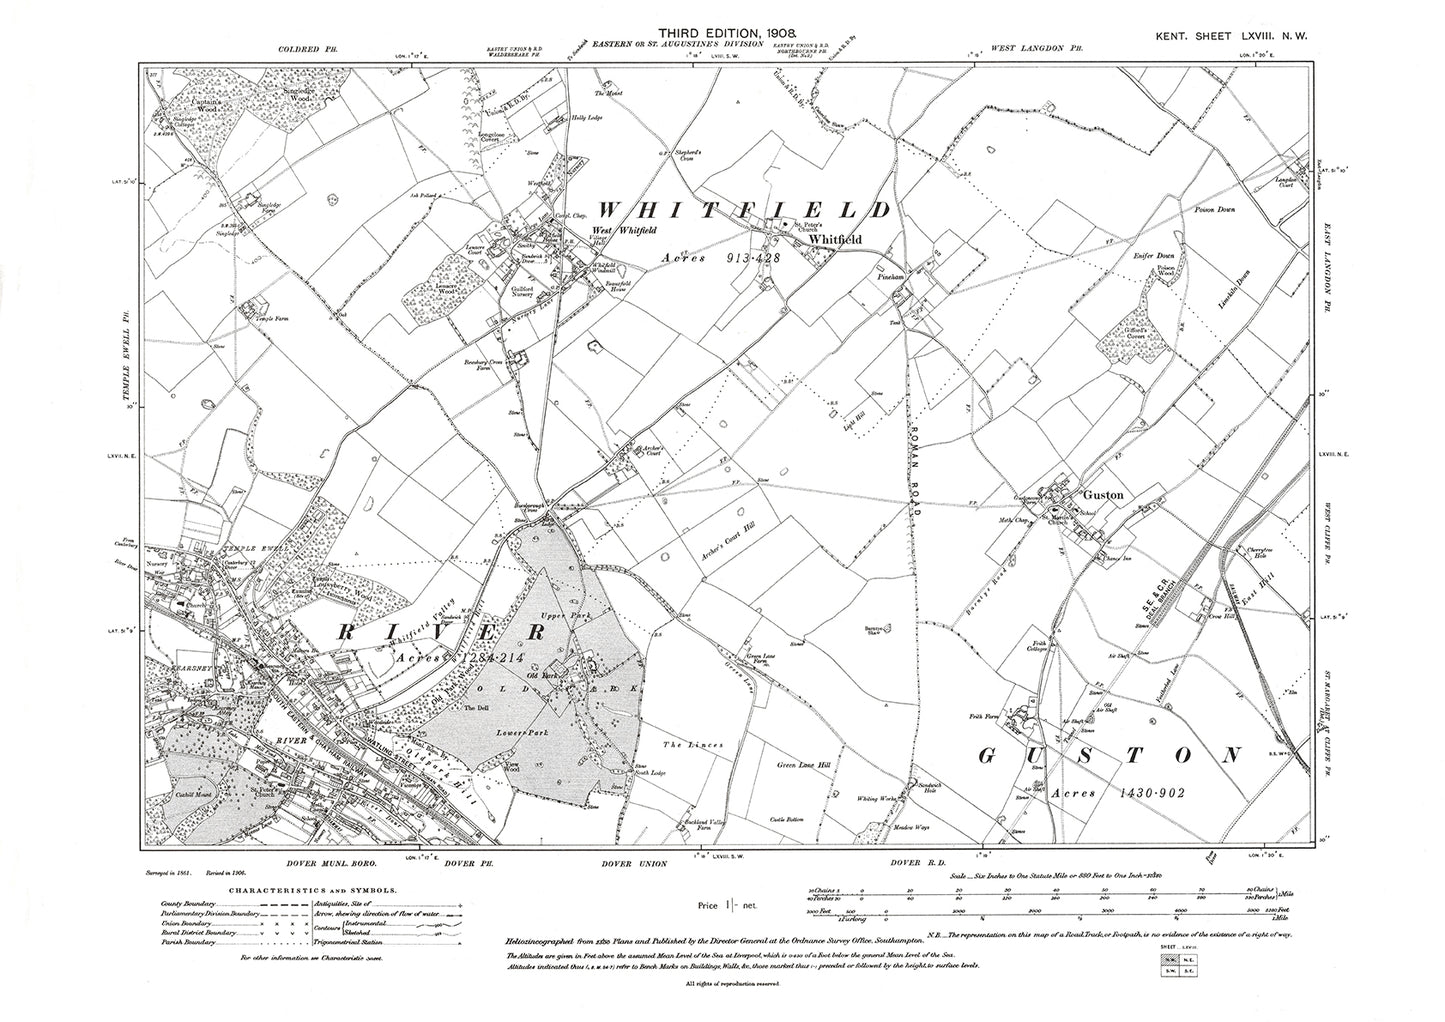 River, Whitfield, old map Kent 1908: 68NW